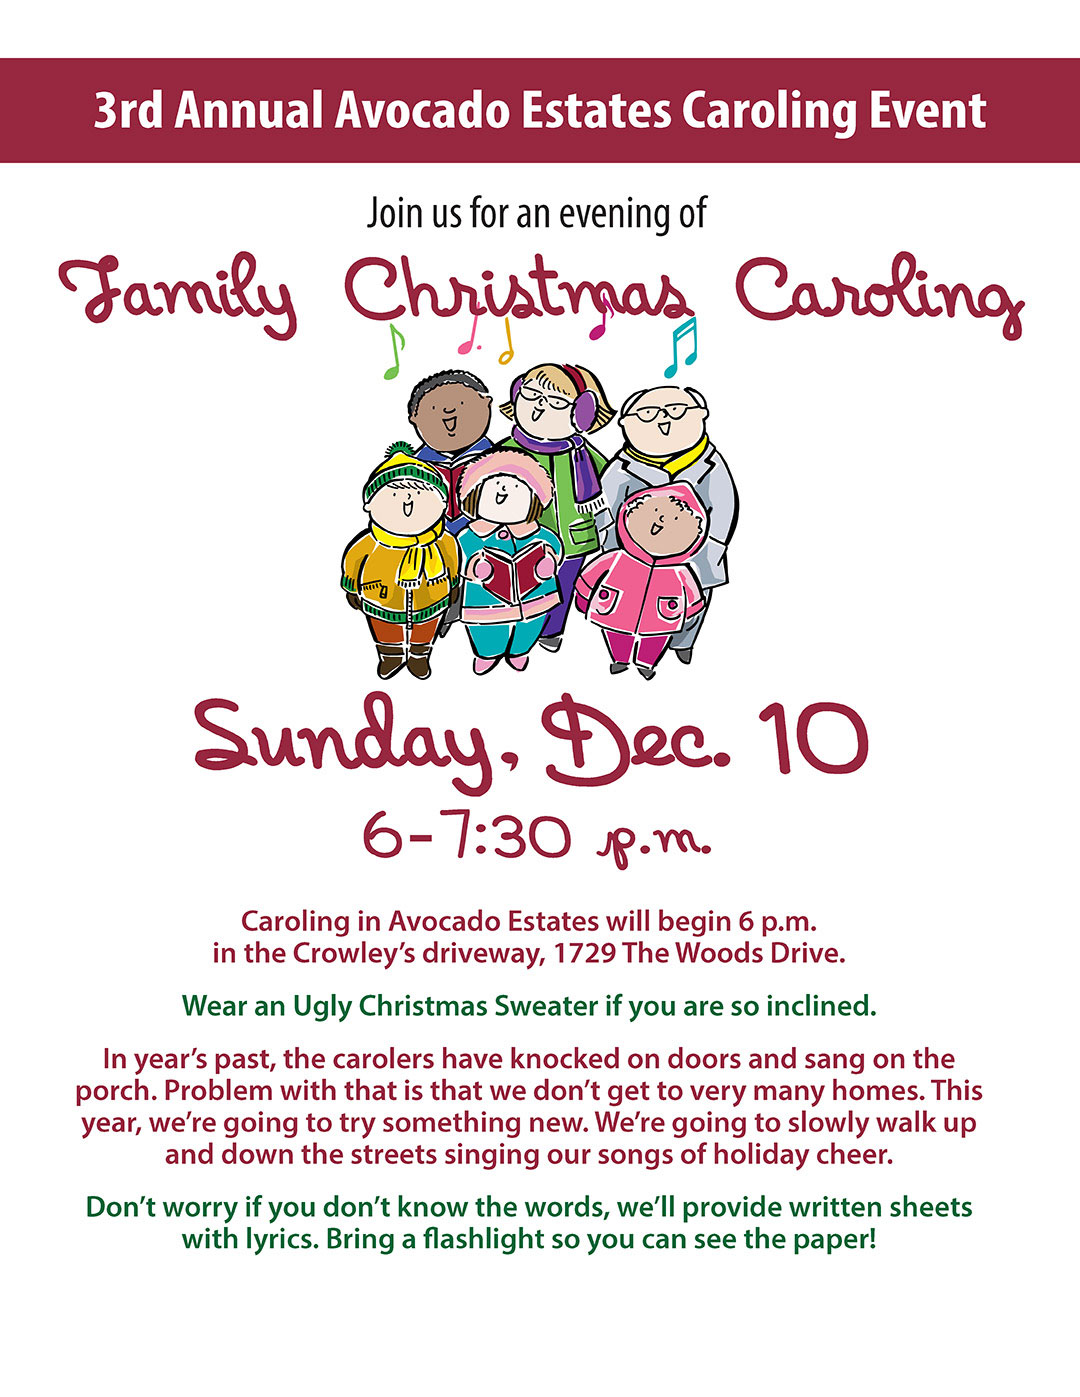 Flyer for Annual Family Christmas Caroling.  Same contents as news article but with cartoon people bundled up in winter clothes and caroling